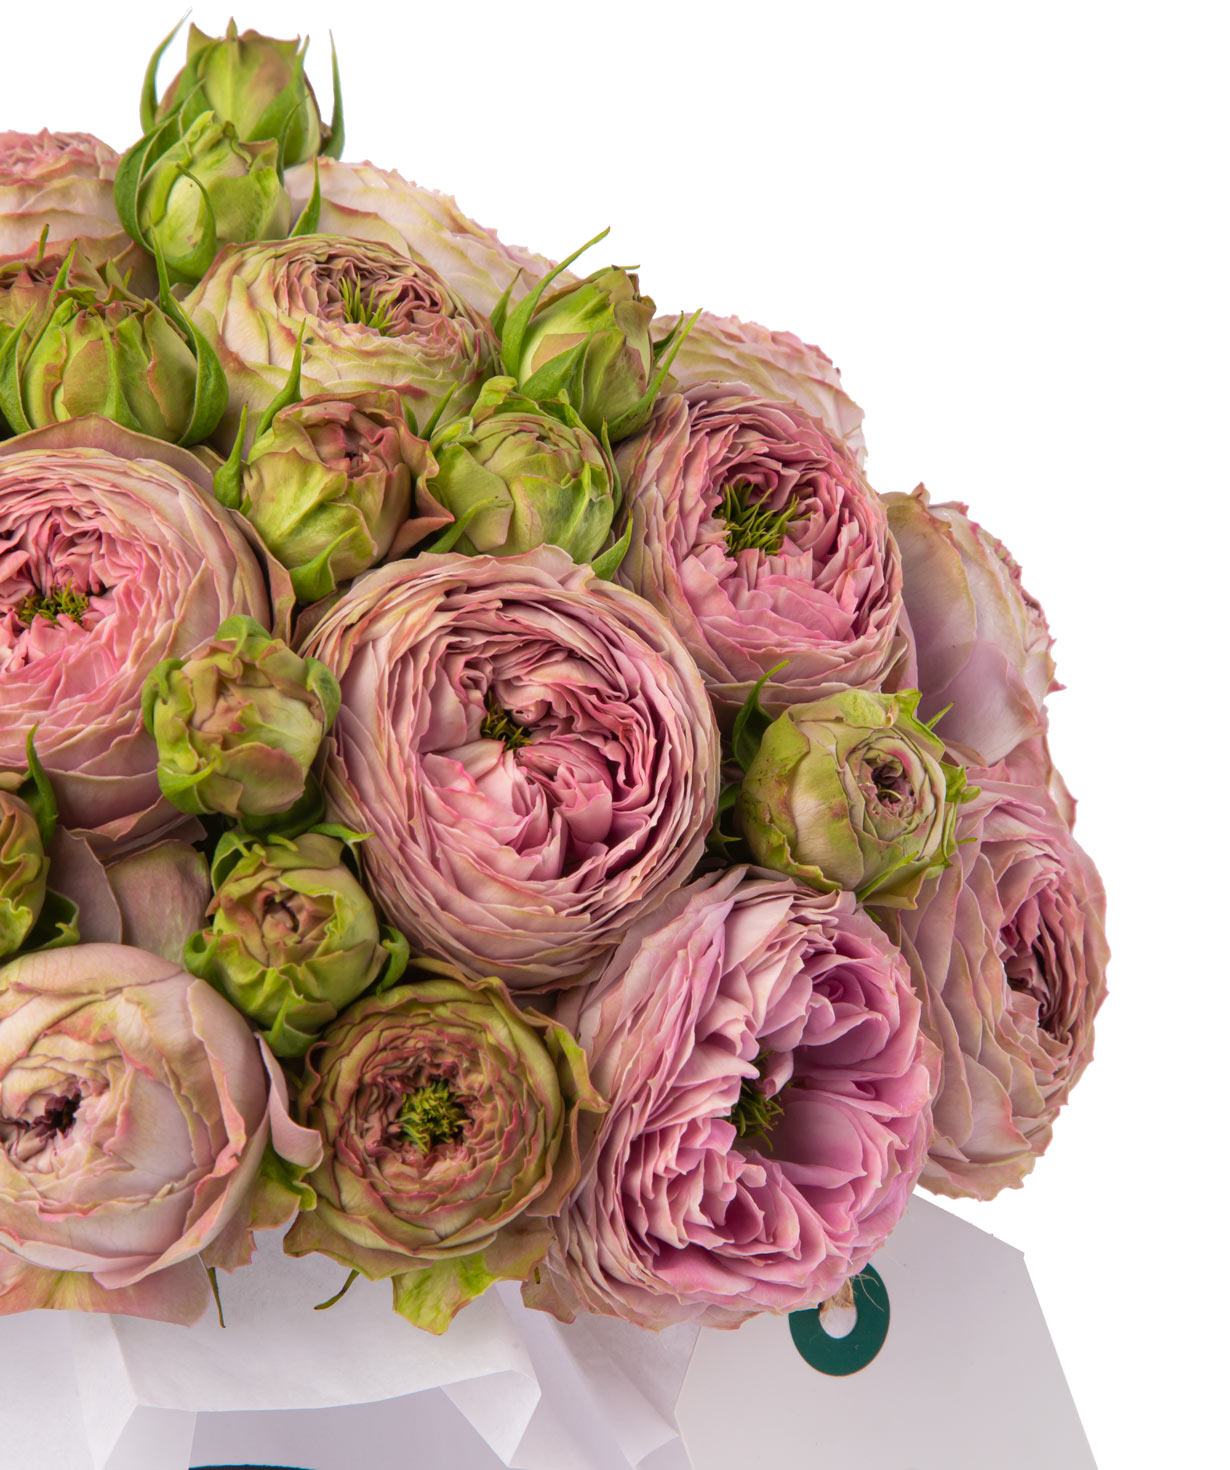 Composition `Cora` with peony roses